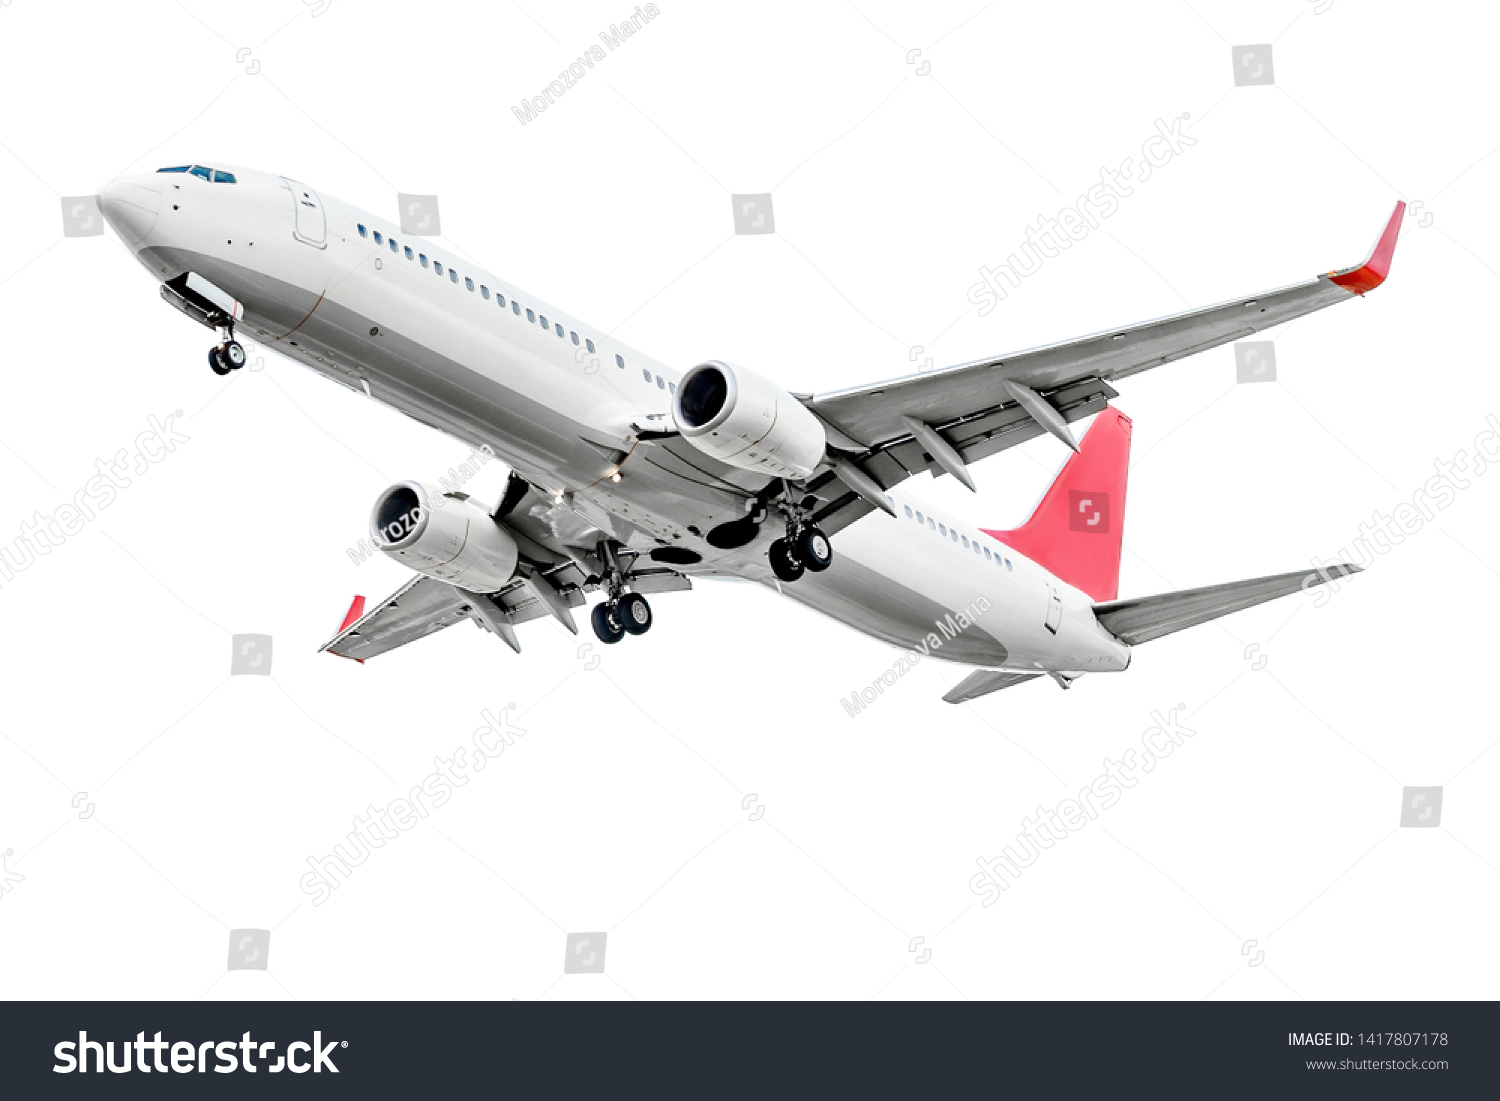 Plane with two turbofan engines, landing gear and red winglets, isolated on white #1417807178